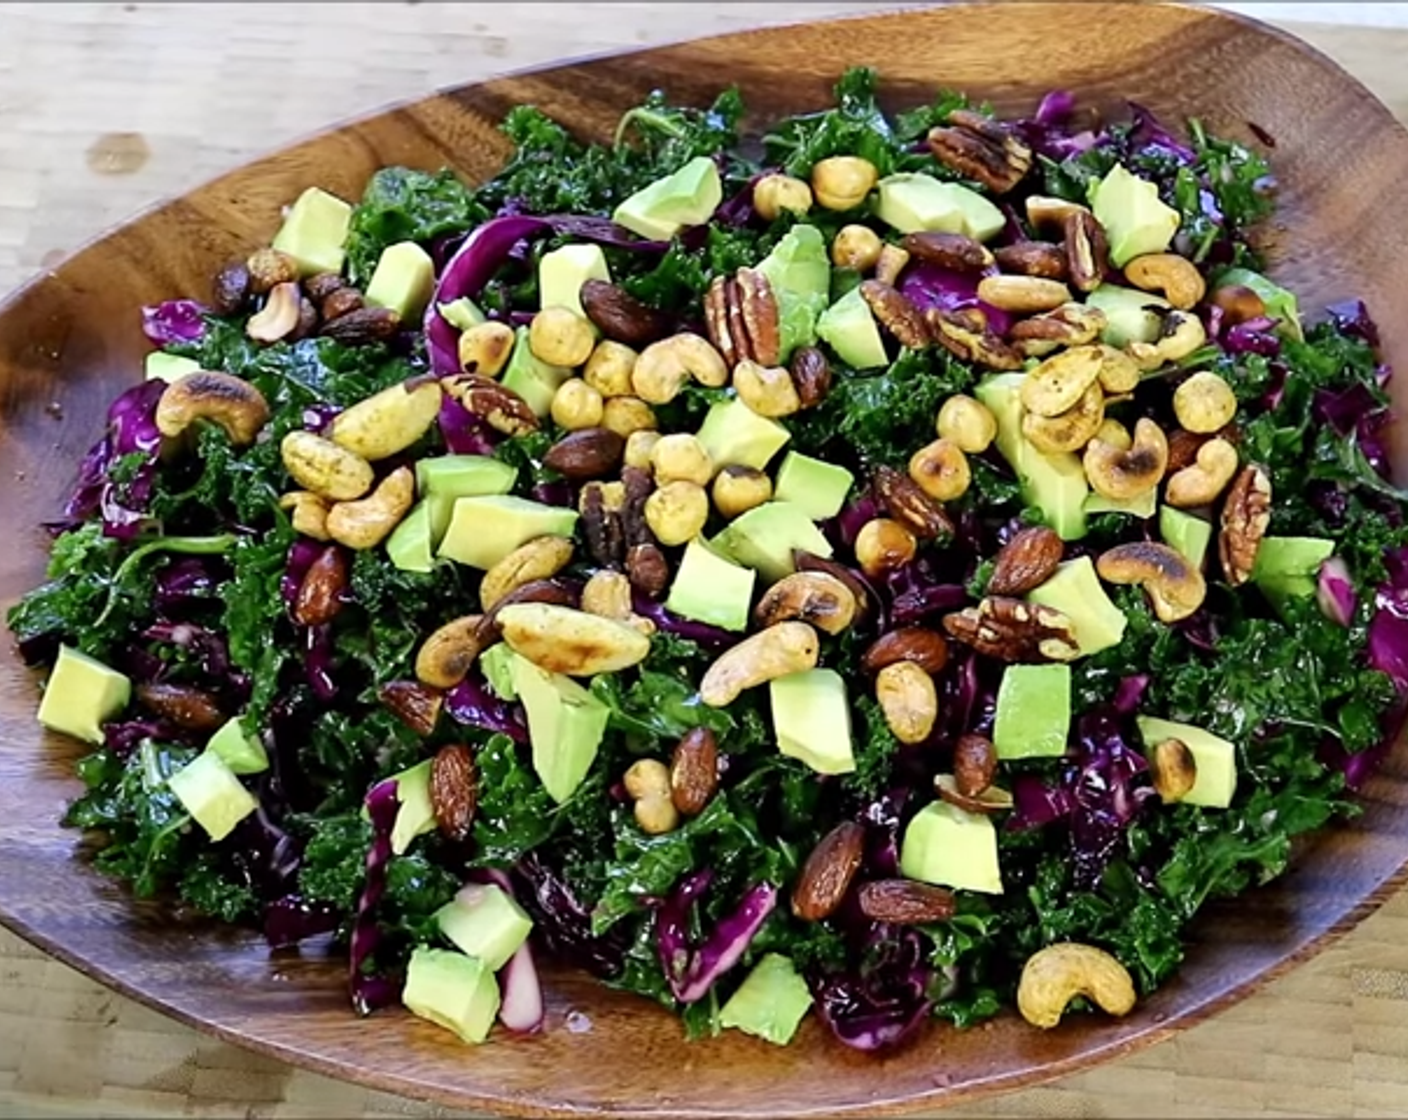 Kale Salad with Avocado and Toasted Nuts